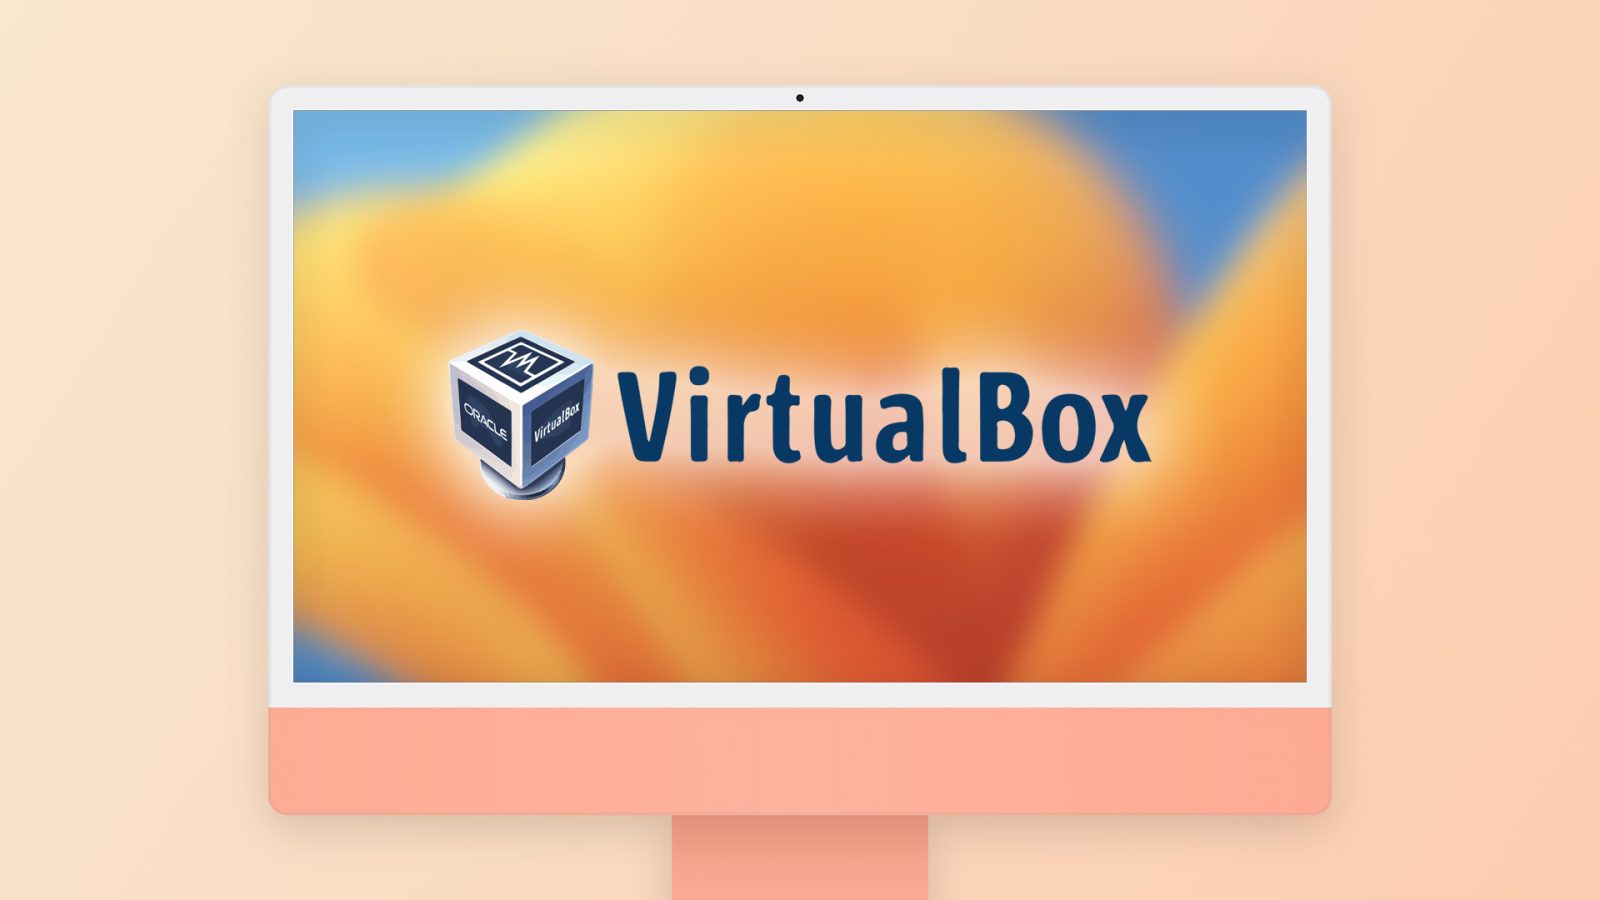 Oracle VirtualBox updated to version 7.0 with beta support for Apple Silicon Macs